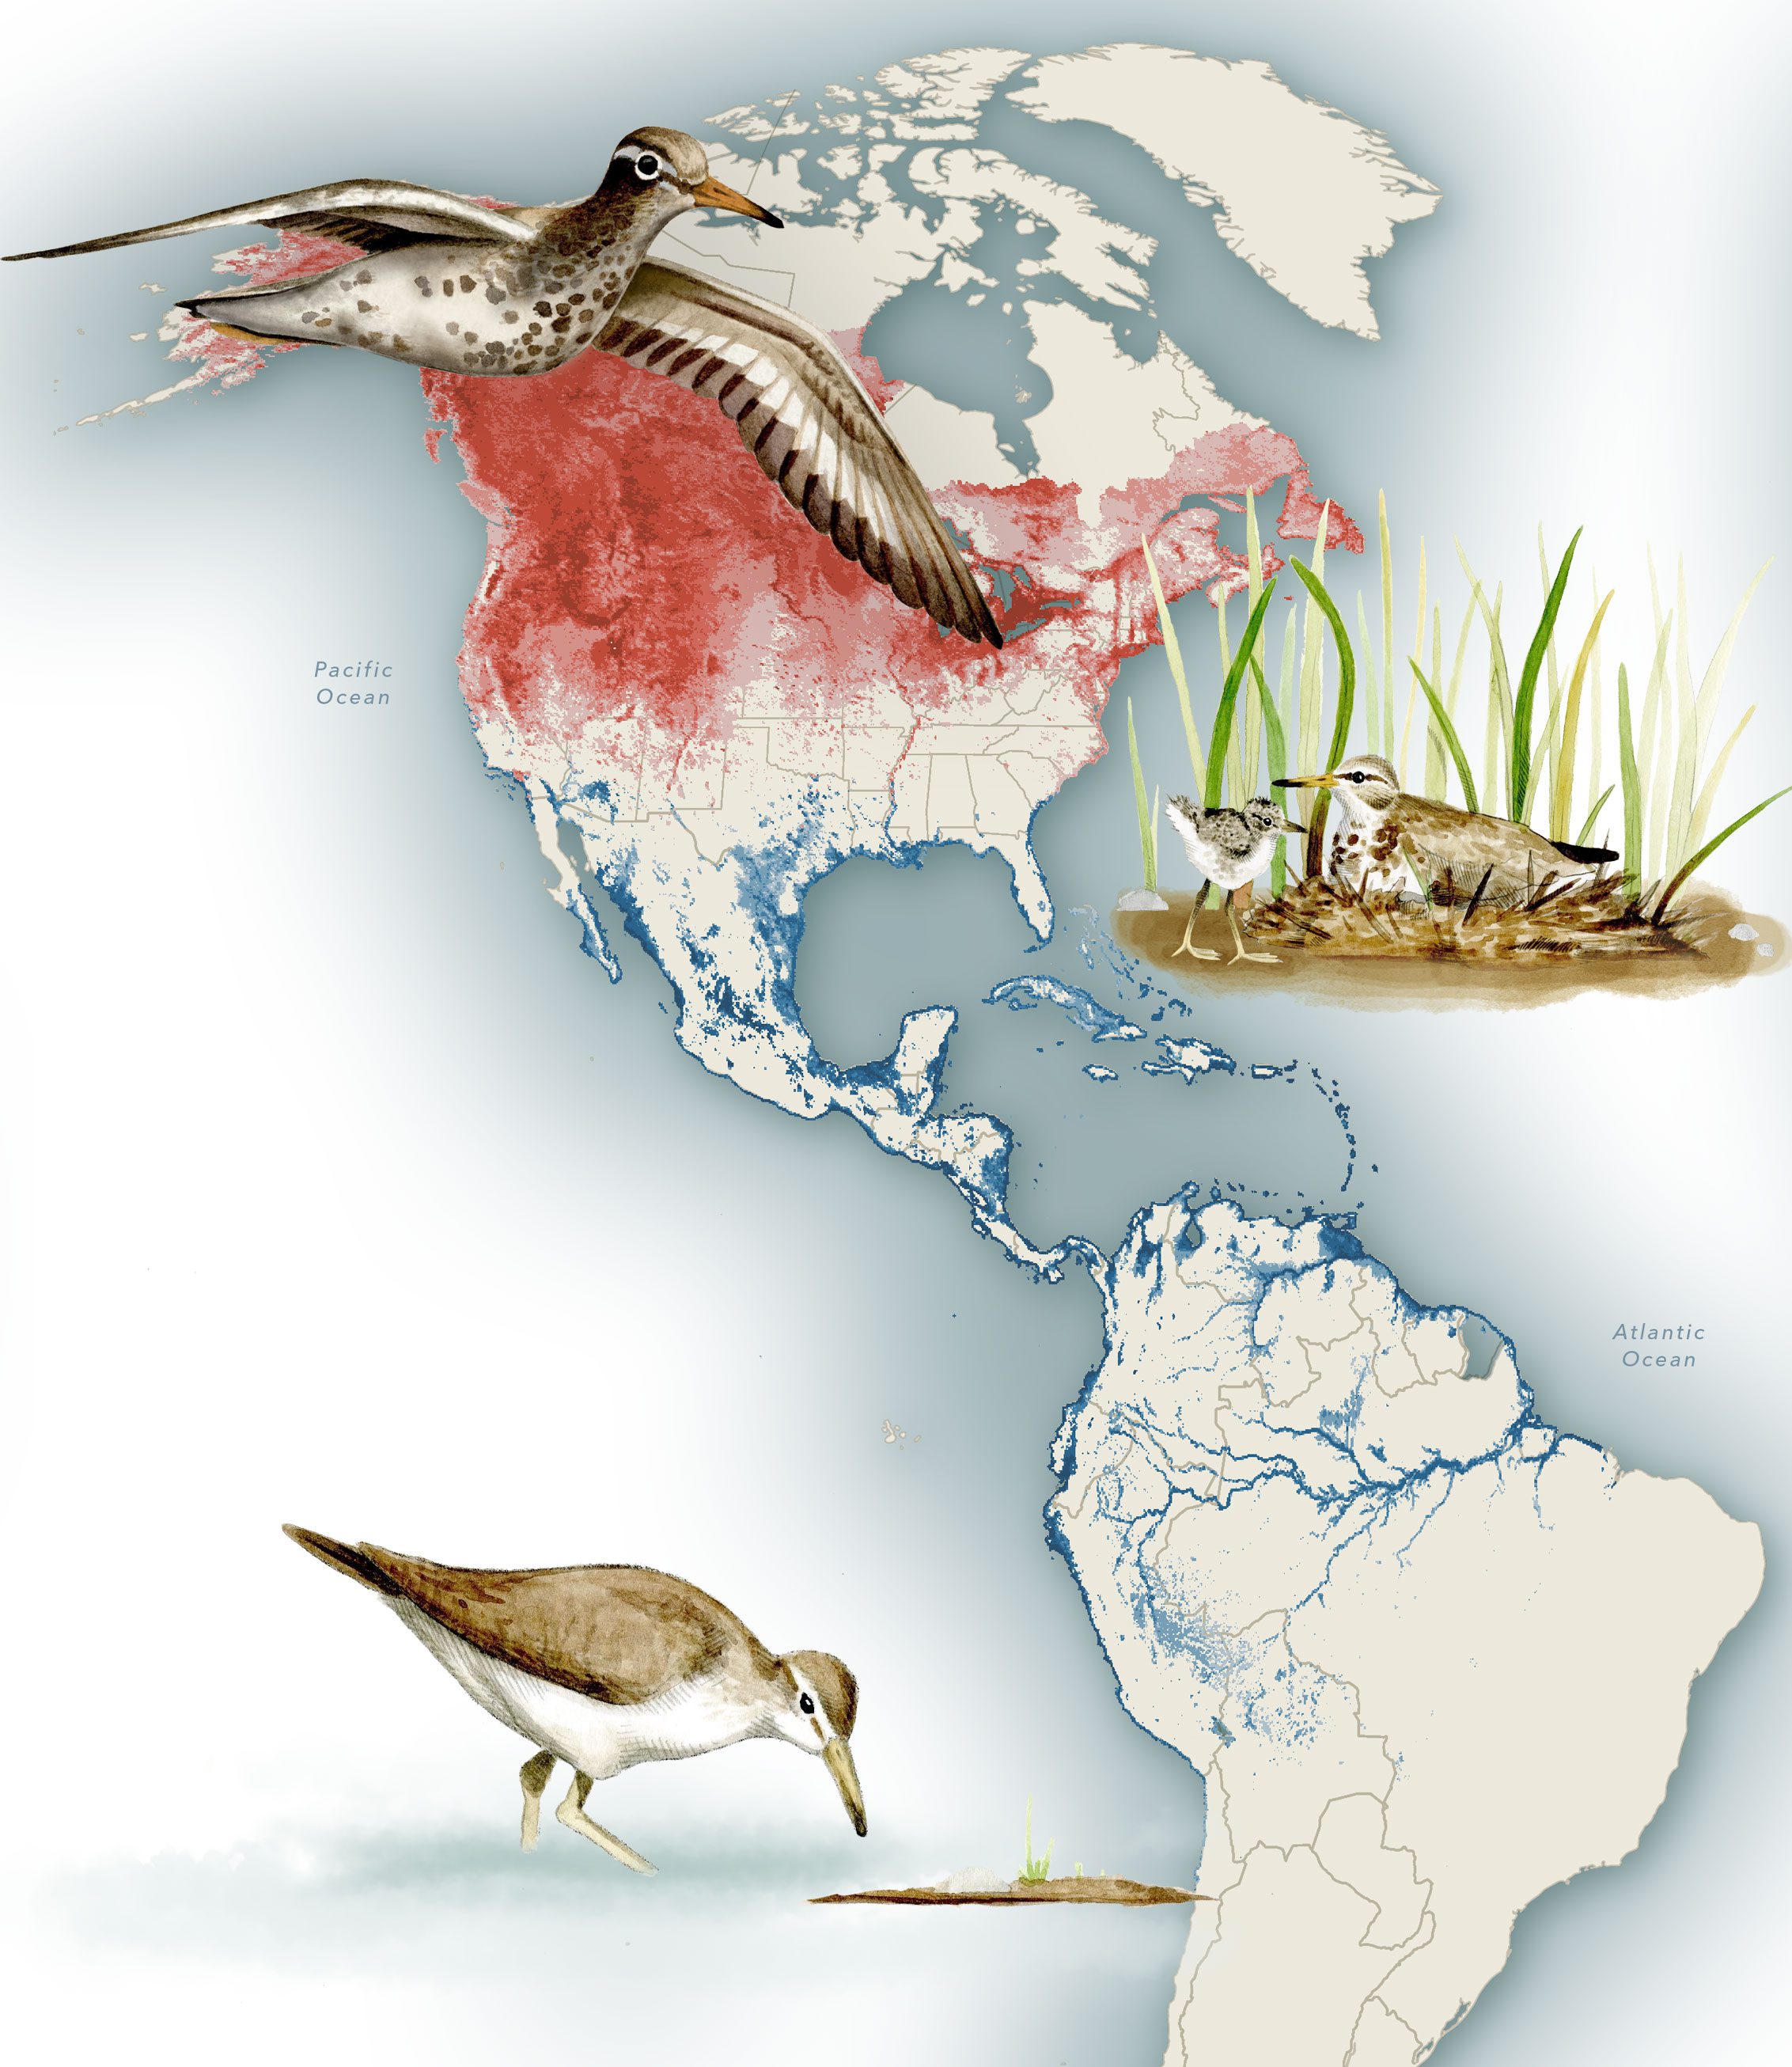 Spotted Sandpiper migration route. Top to bottom: a male flying in breeding plumage, a male with young, a male foraging in winter plumage. Illustration by Bartels Science Illustrator Megan Bishop.